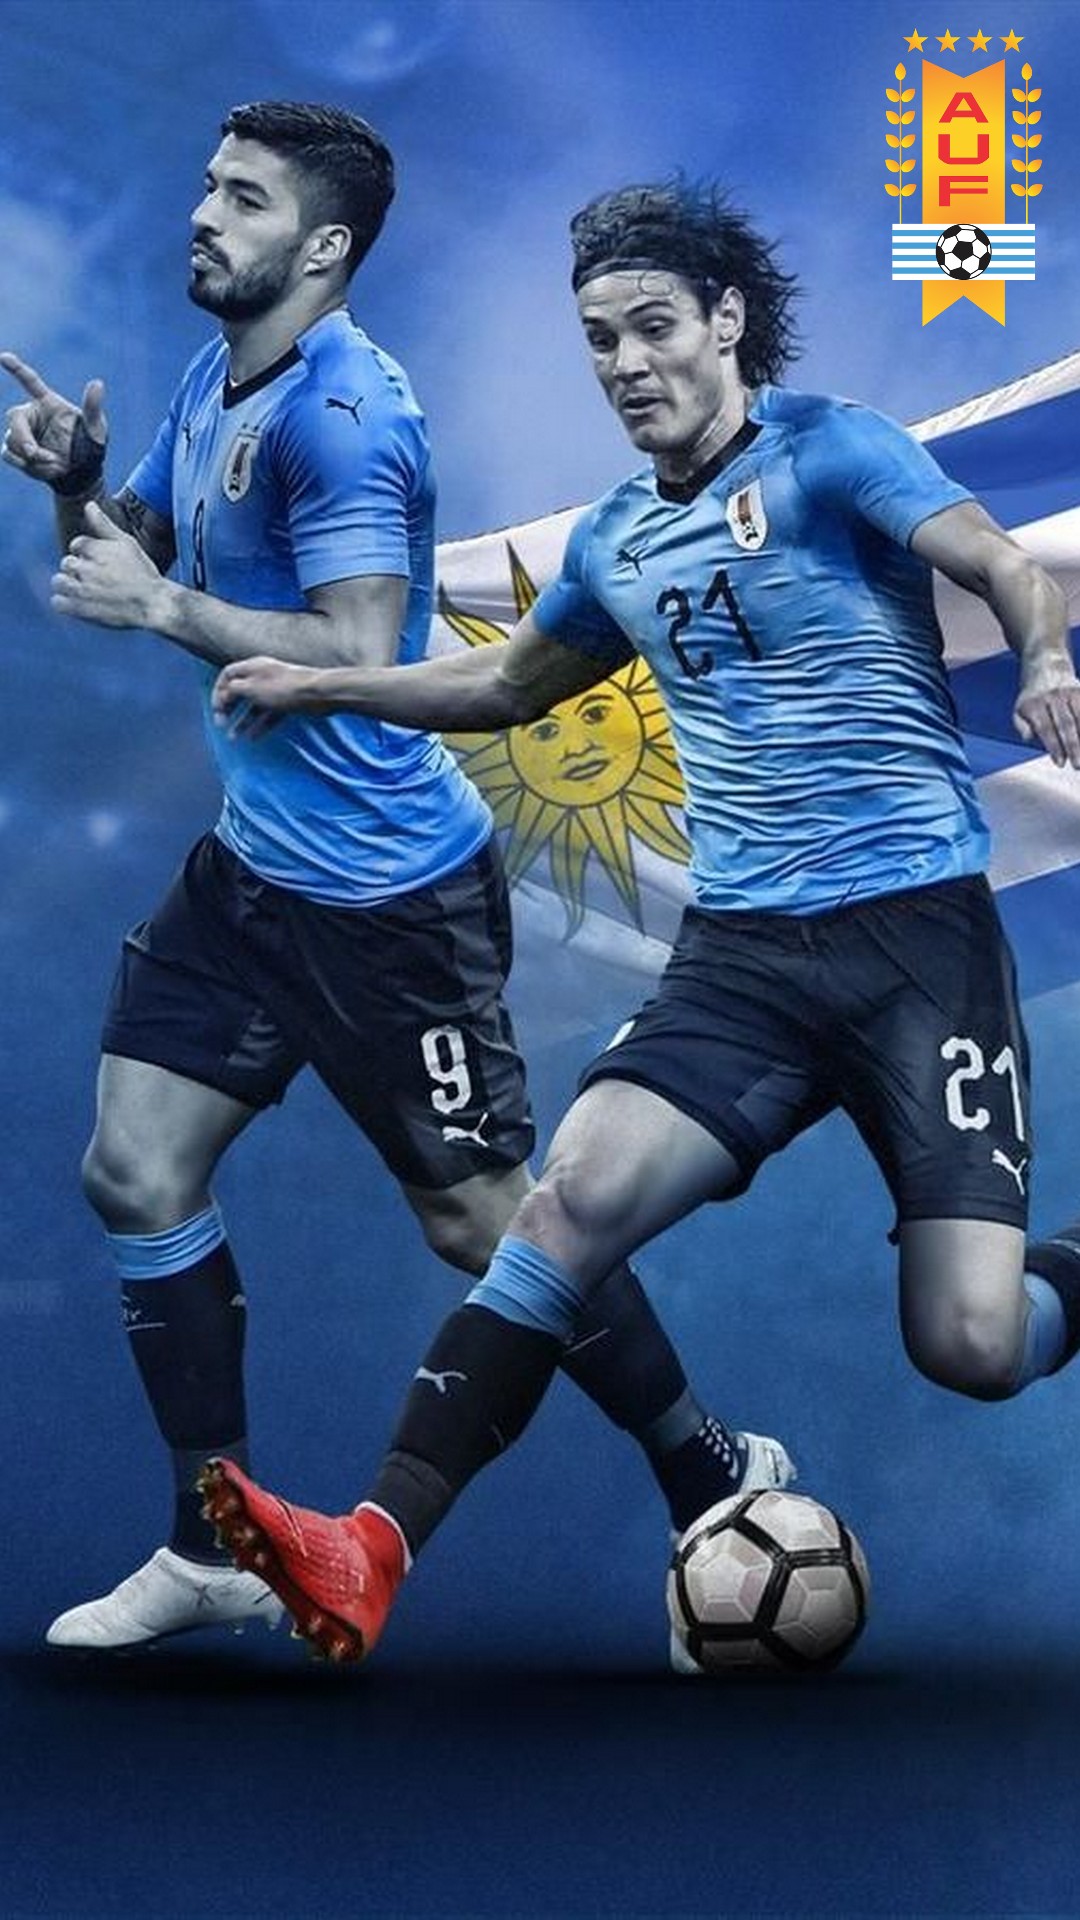 iPhone Wallpaper HD Uruguay National Team With Resolution 1080X1920 pixel. You can make this wallpaper for your Mac or Windows Desktop Background, iPhone, Android or Tablet and another Smartphone device for free